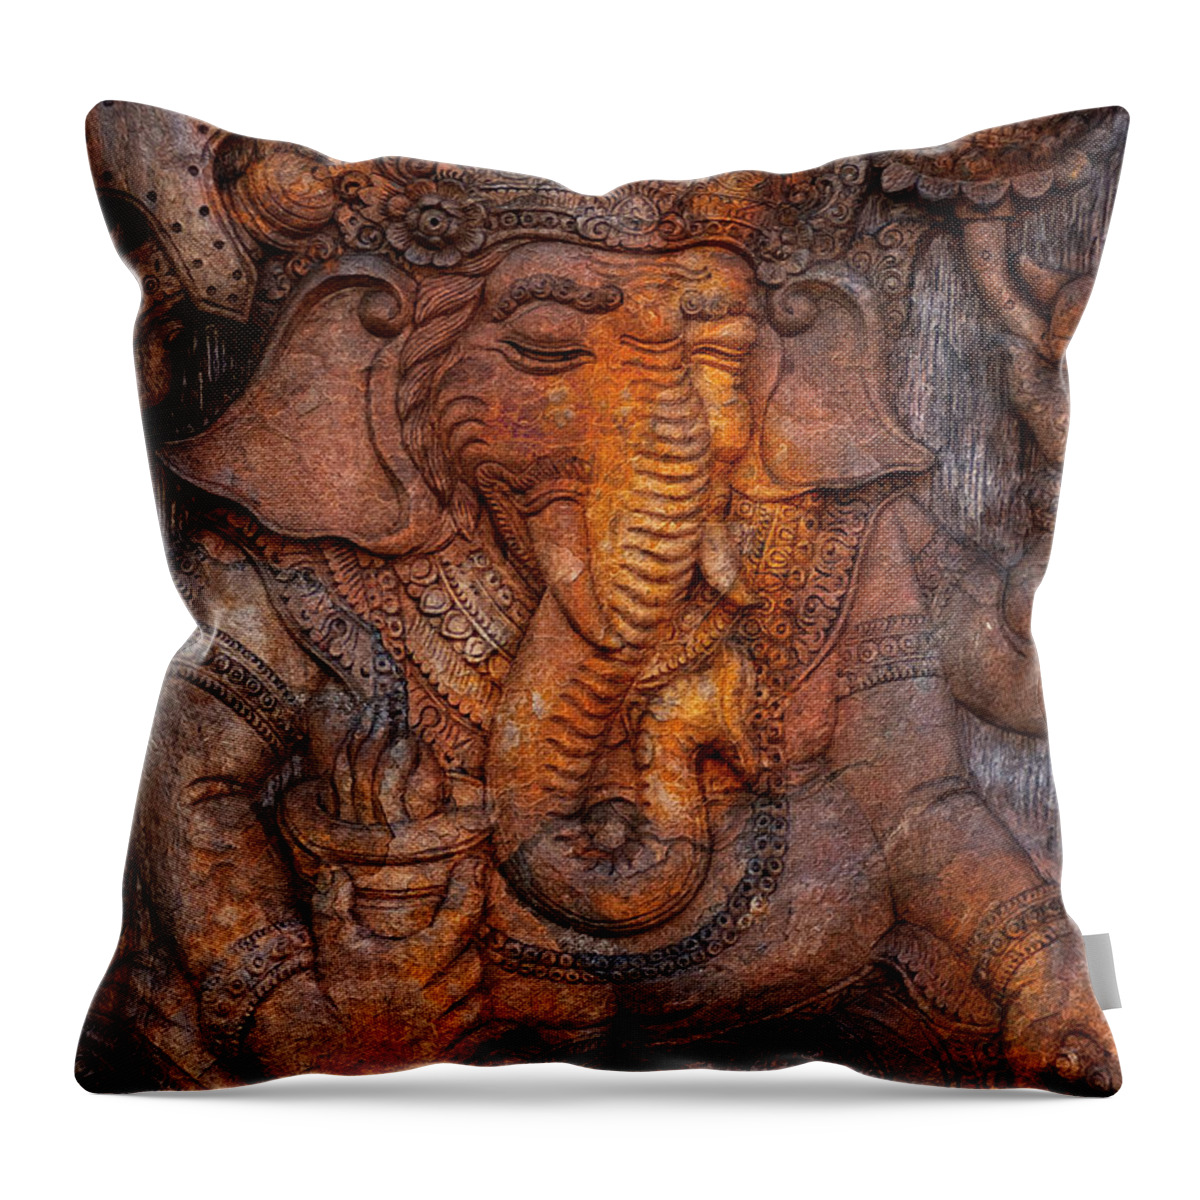 Ganesh Throw Pillow featuring the photograph Ganesh 2 by WB Johnston